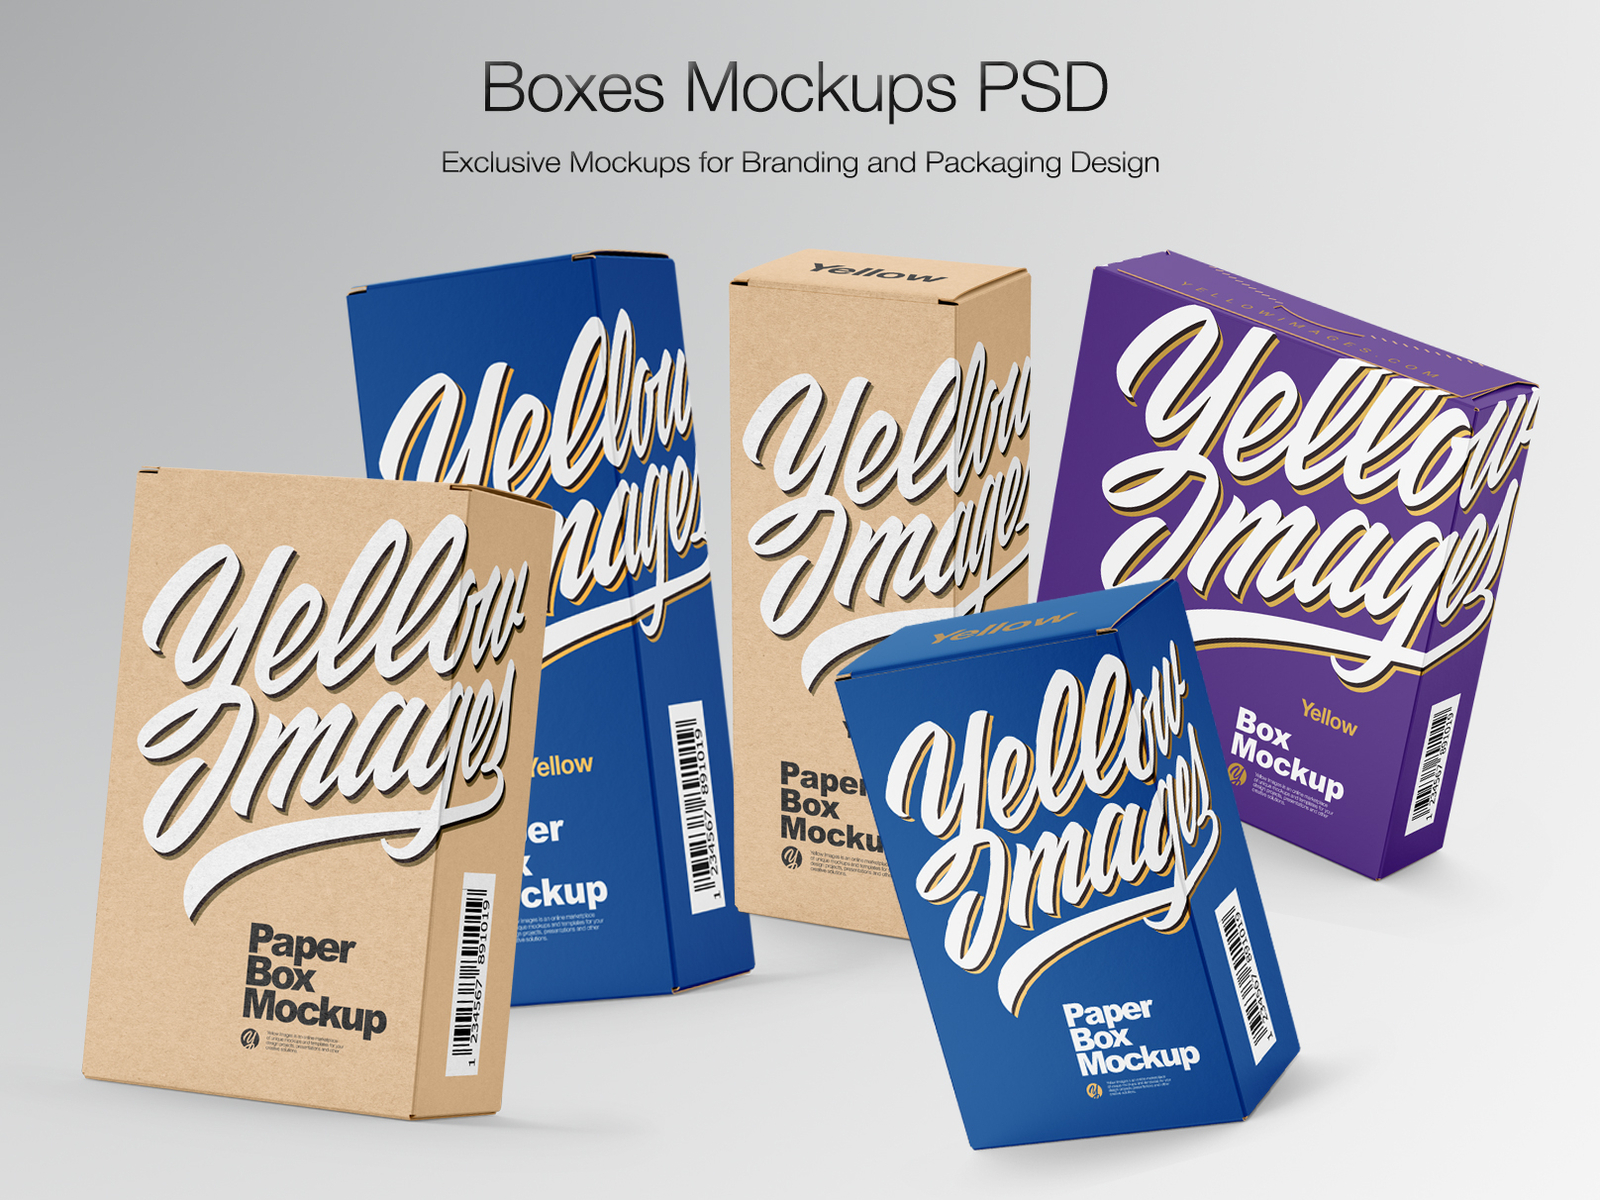 Download Boxes Mockups PSD by Andrey Gapon on Dribbble